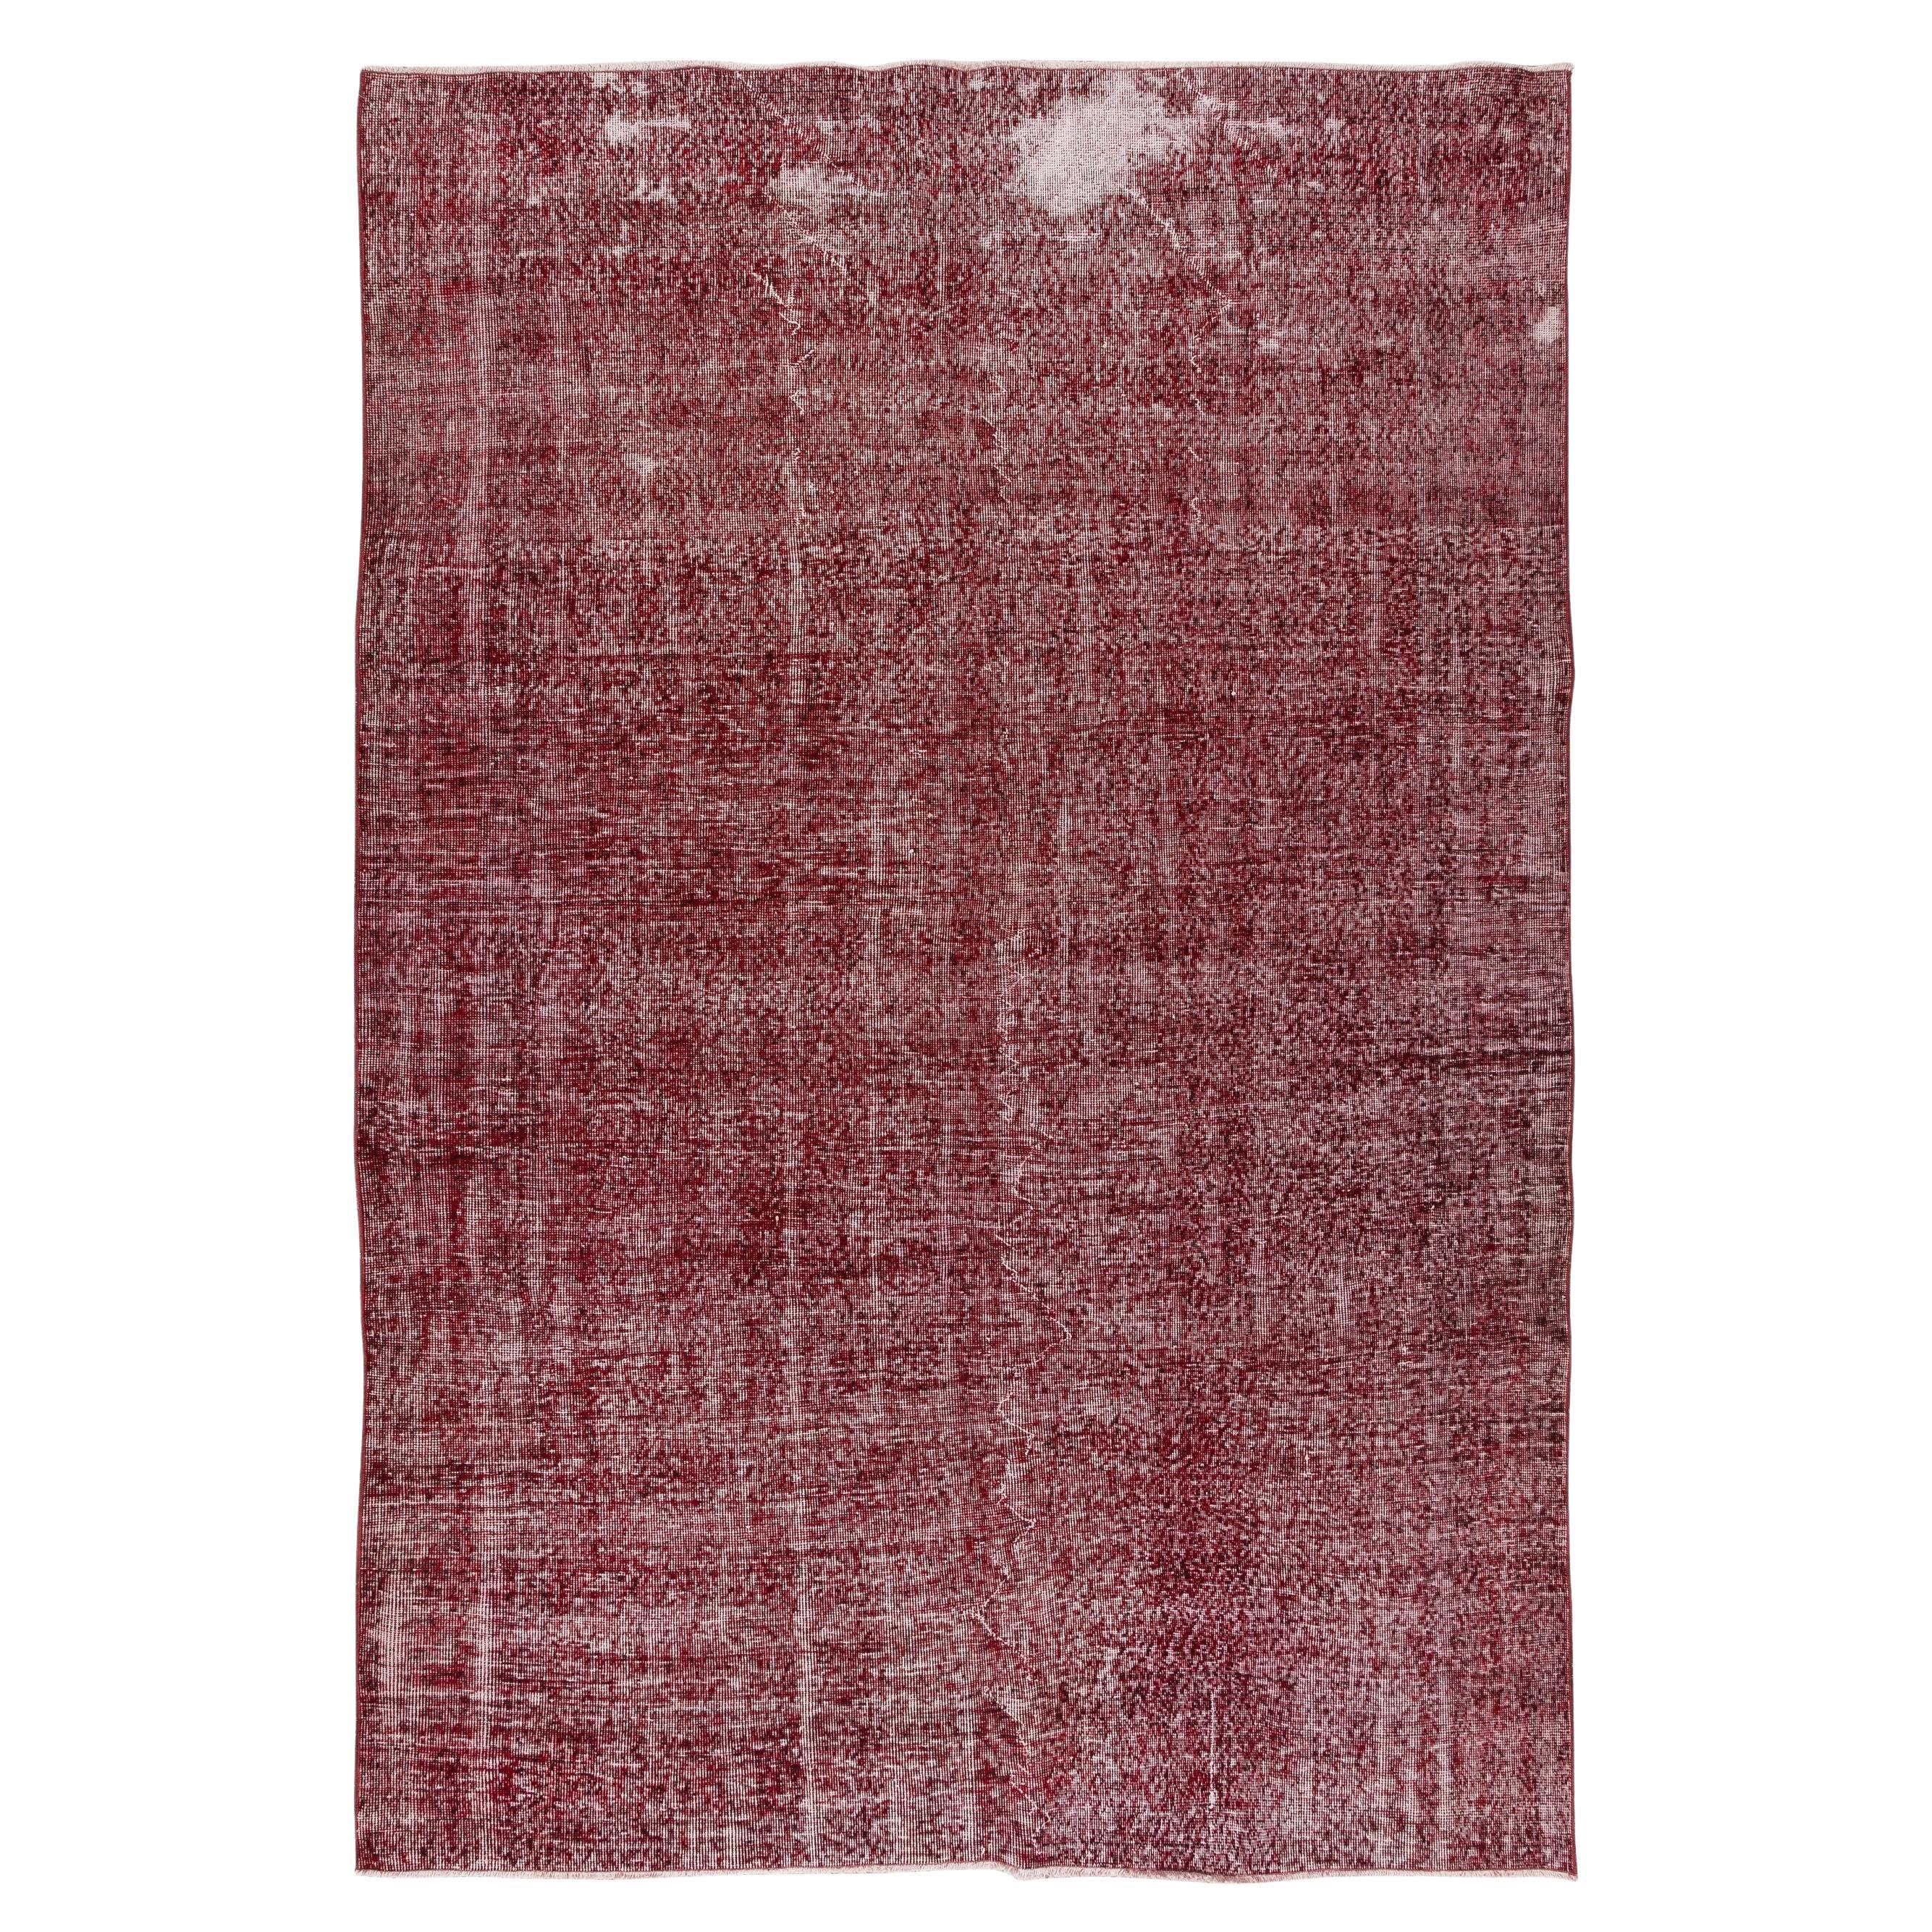 Hand Knotted Vintage Rug in Red 4 Modern Interiors, Turkish Carpet